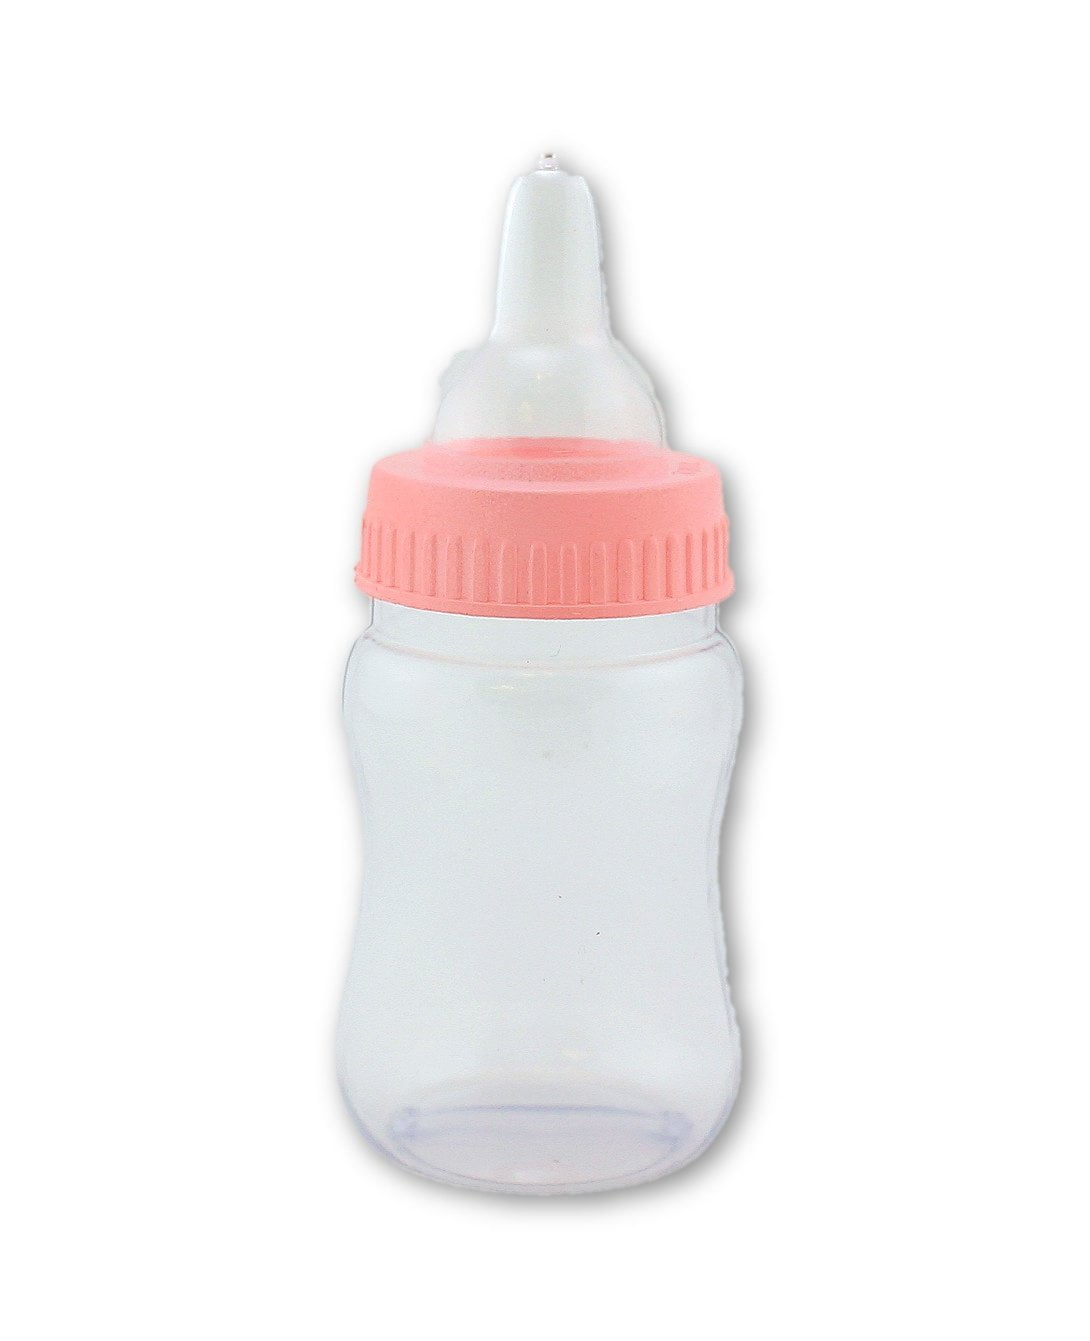 144 miniature baby bottles white with colorful caps 